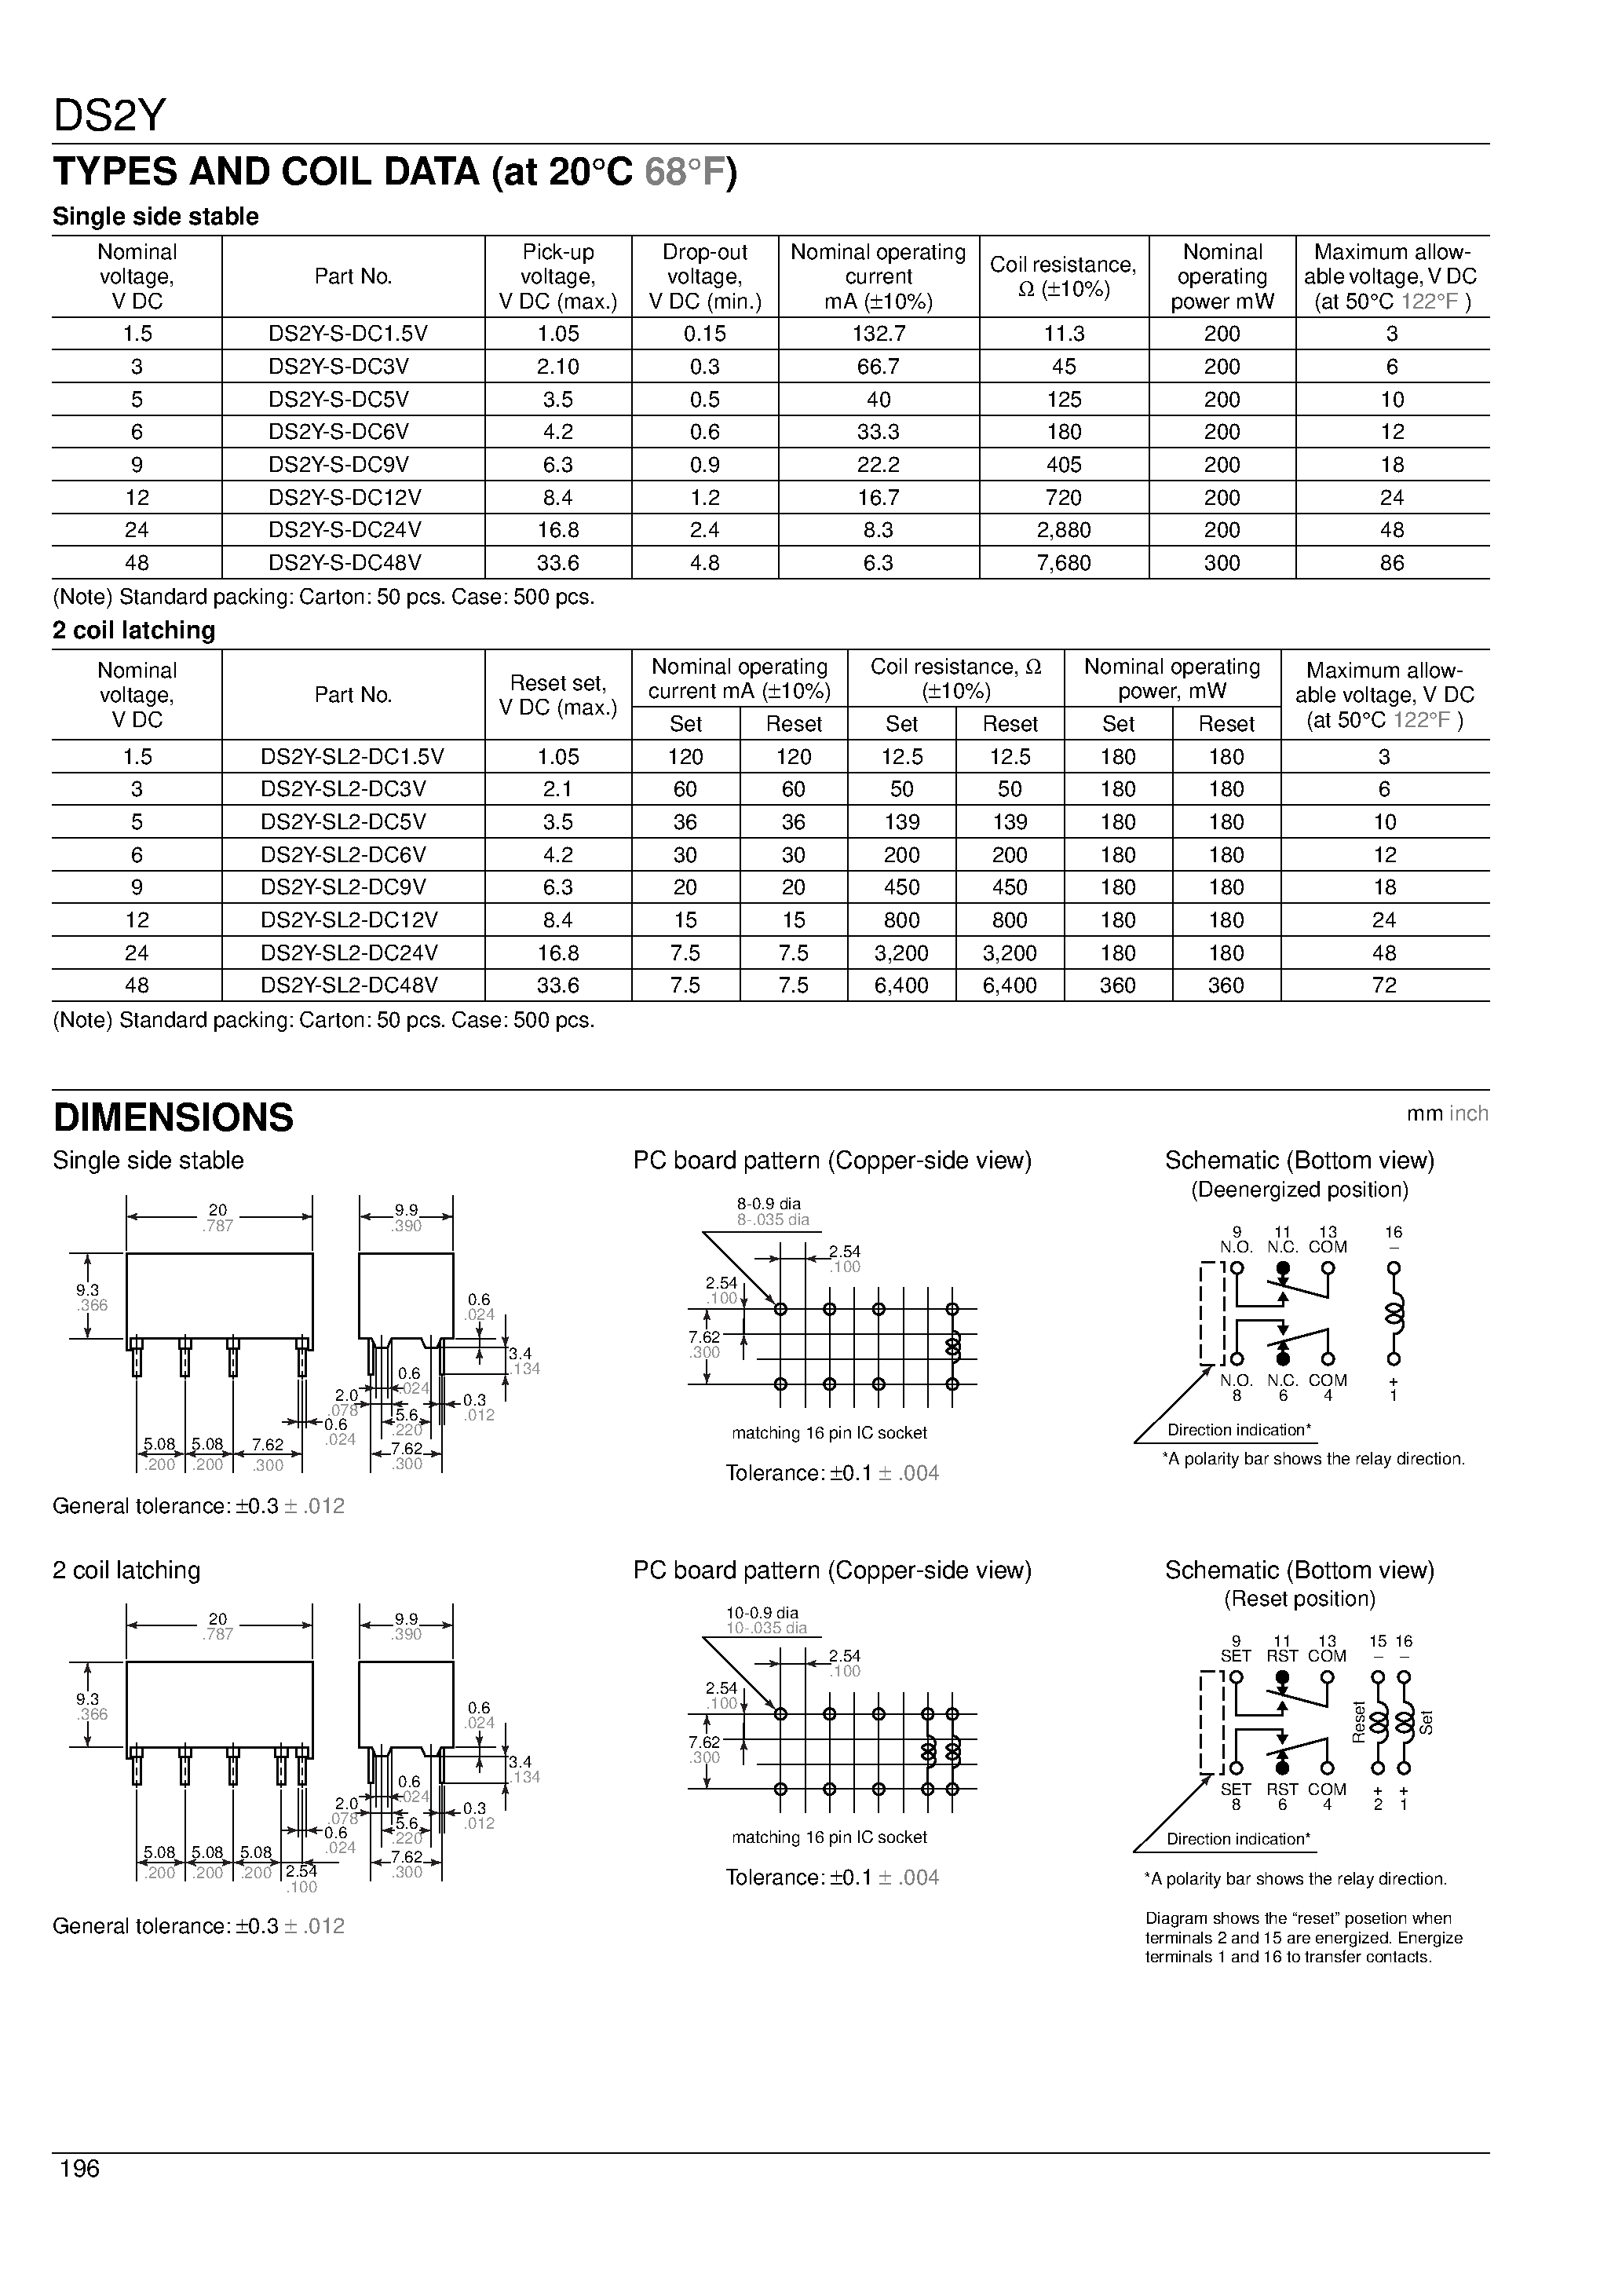 Datasheet DS2Y-SL2-DC6V - 2 Form C contact High sensitivity-200 mW nominal operating power page 2